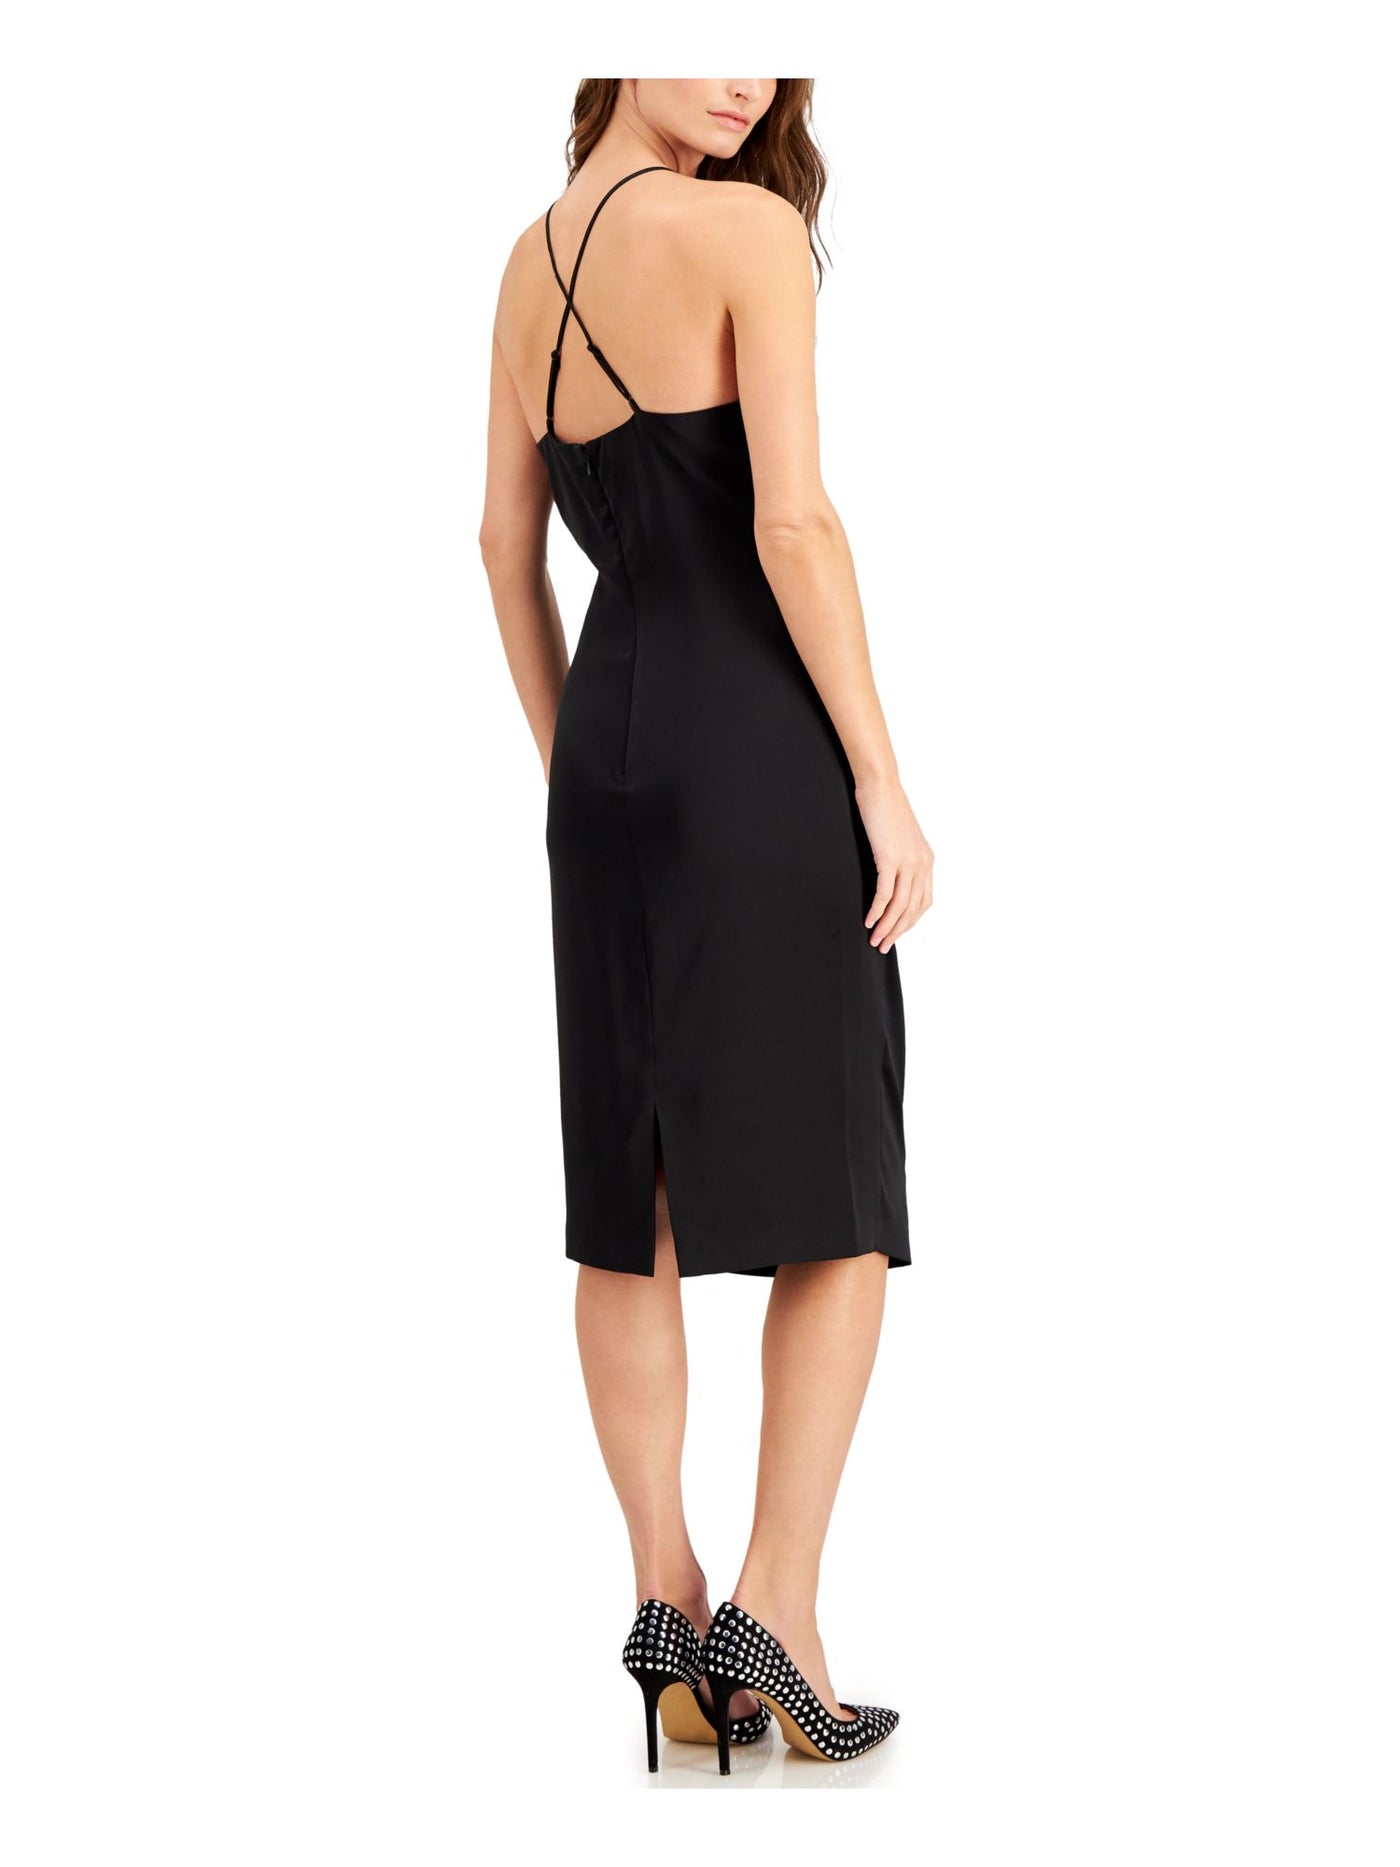 LAUNDRY Womens Black Stretch Zippered Ruched Crisscross Straps At Back Sleeveless Halter Knee Length Party Body Con Dress 2